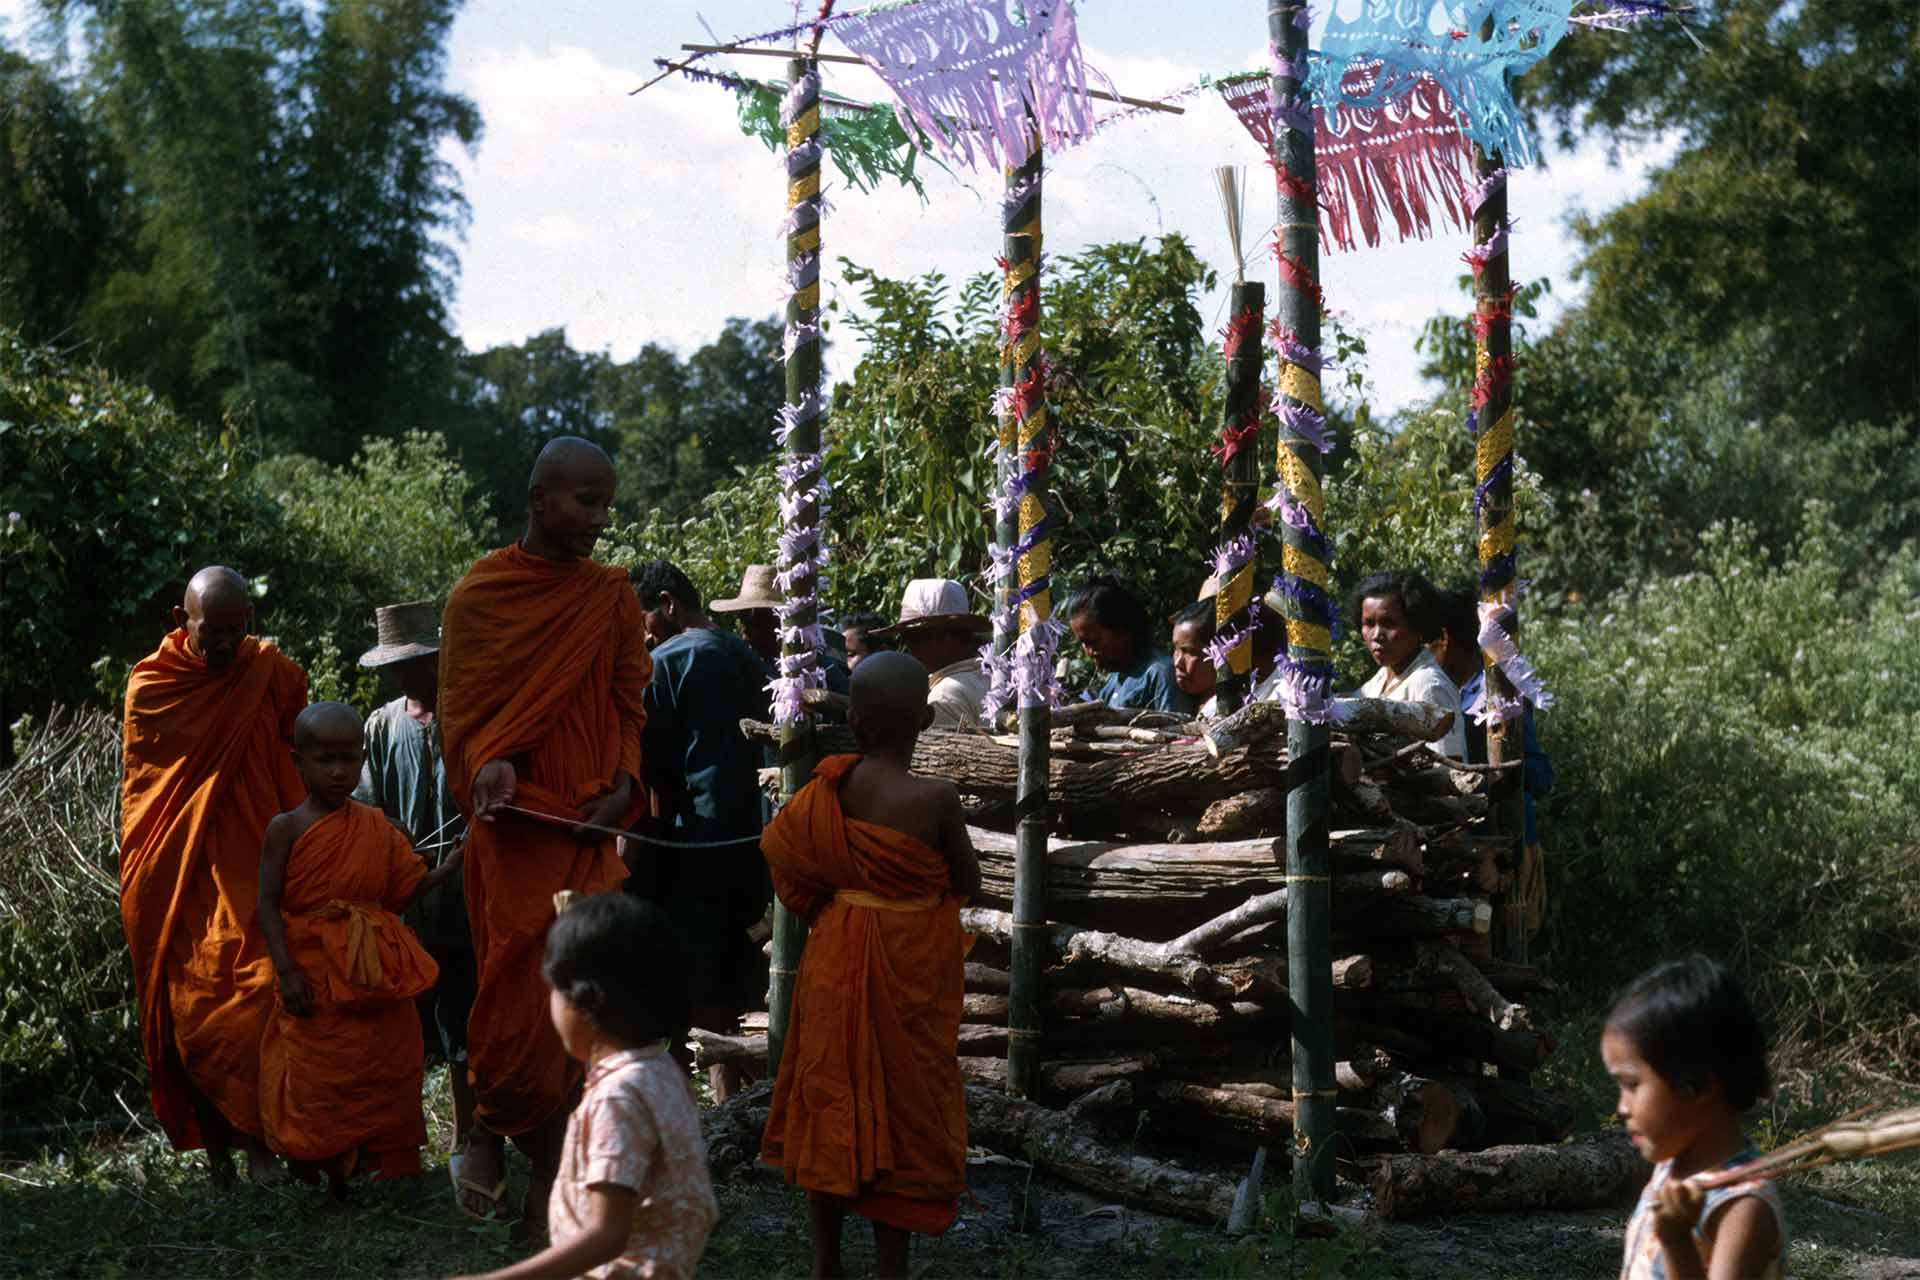 wood piled in funeral pyre, monks and villagers surrounding